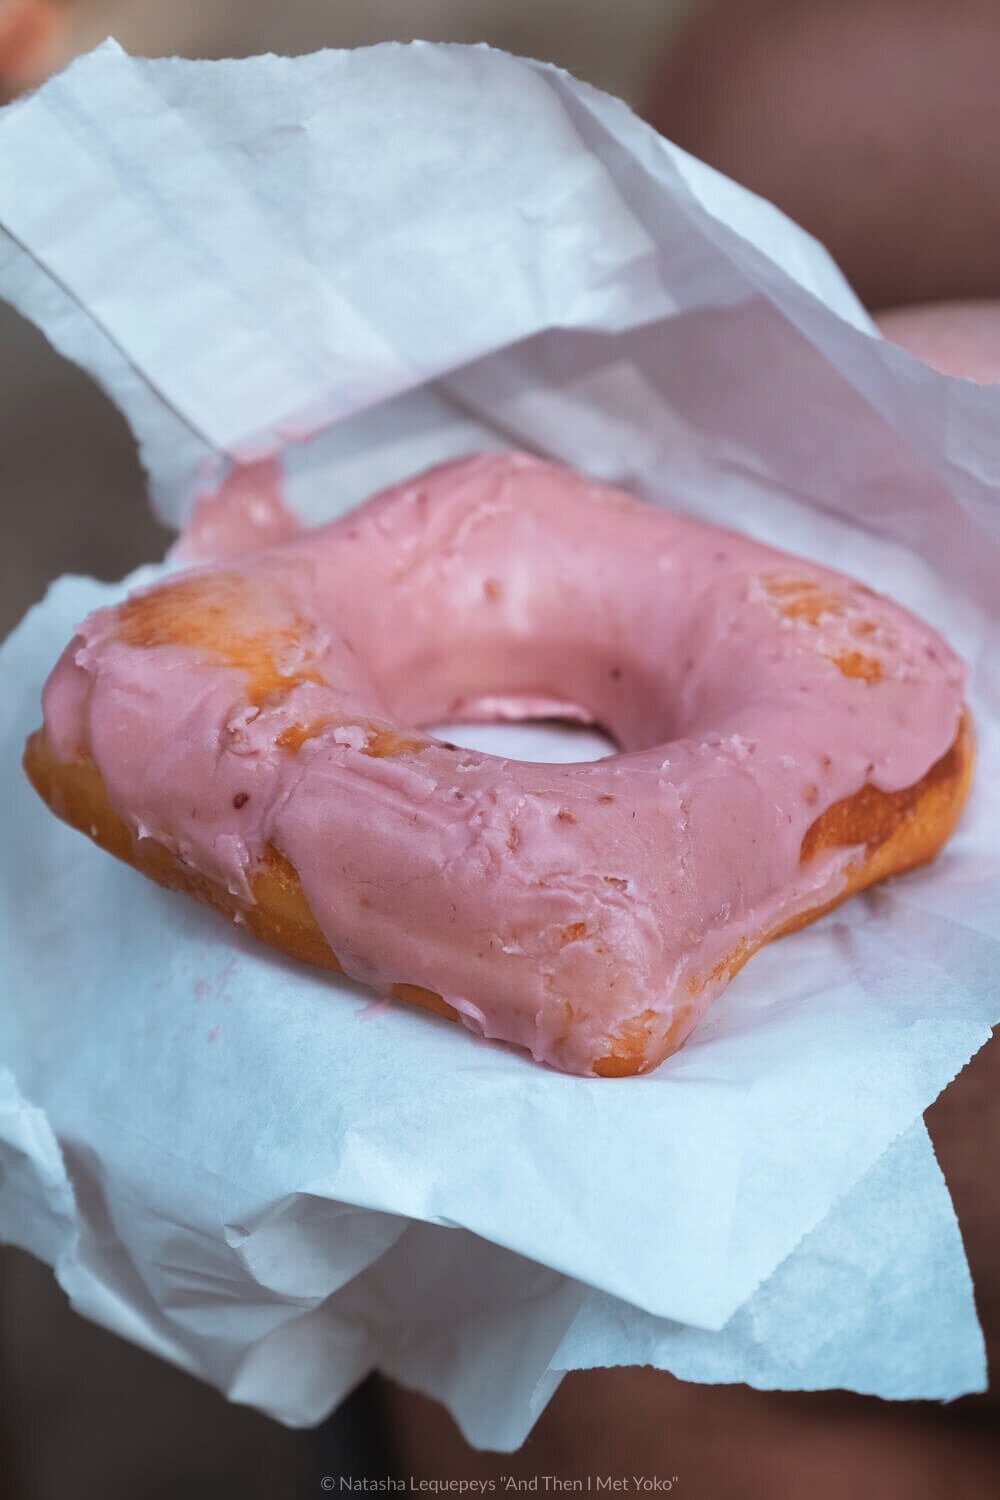 Raspberry donut from Logan Square Farmers Market in Chicago, USA. Travel photography and guide by © Natasha Lequepeys for "And Then I Met Yoko". #chicago #usa #travelblog #travelphotography